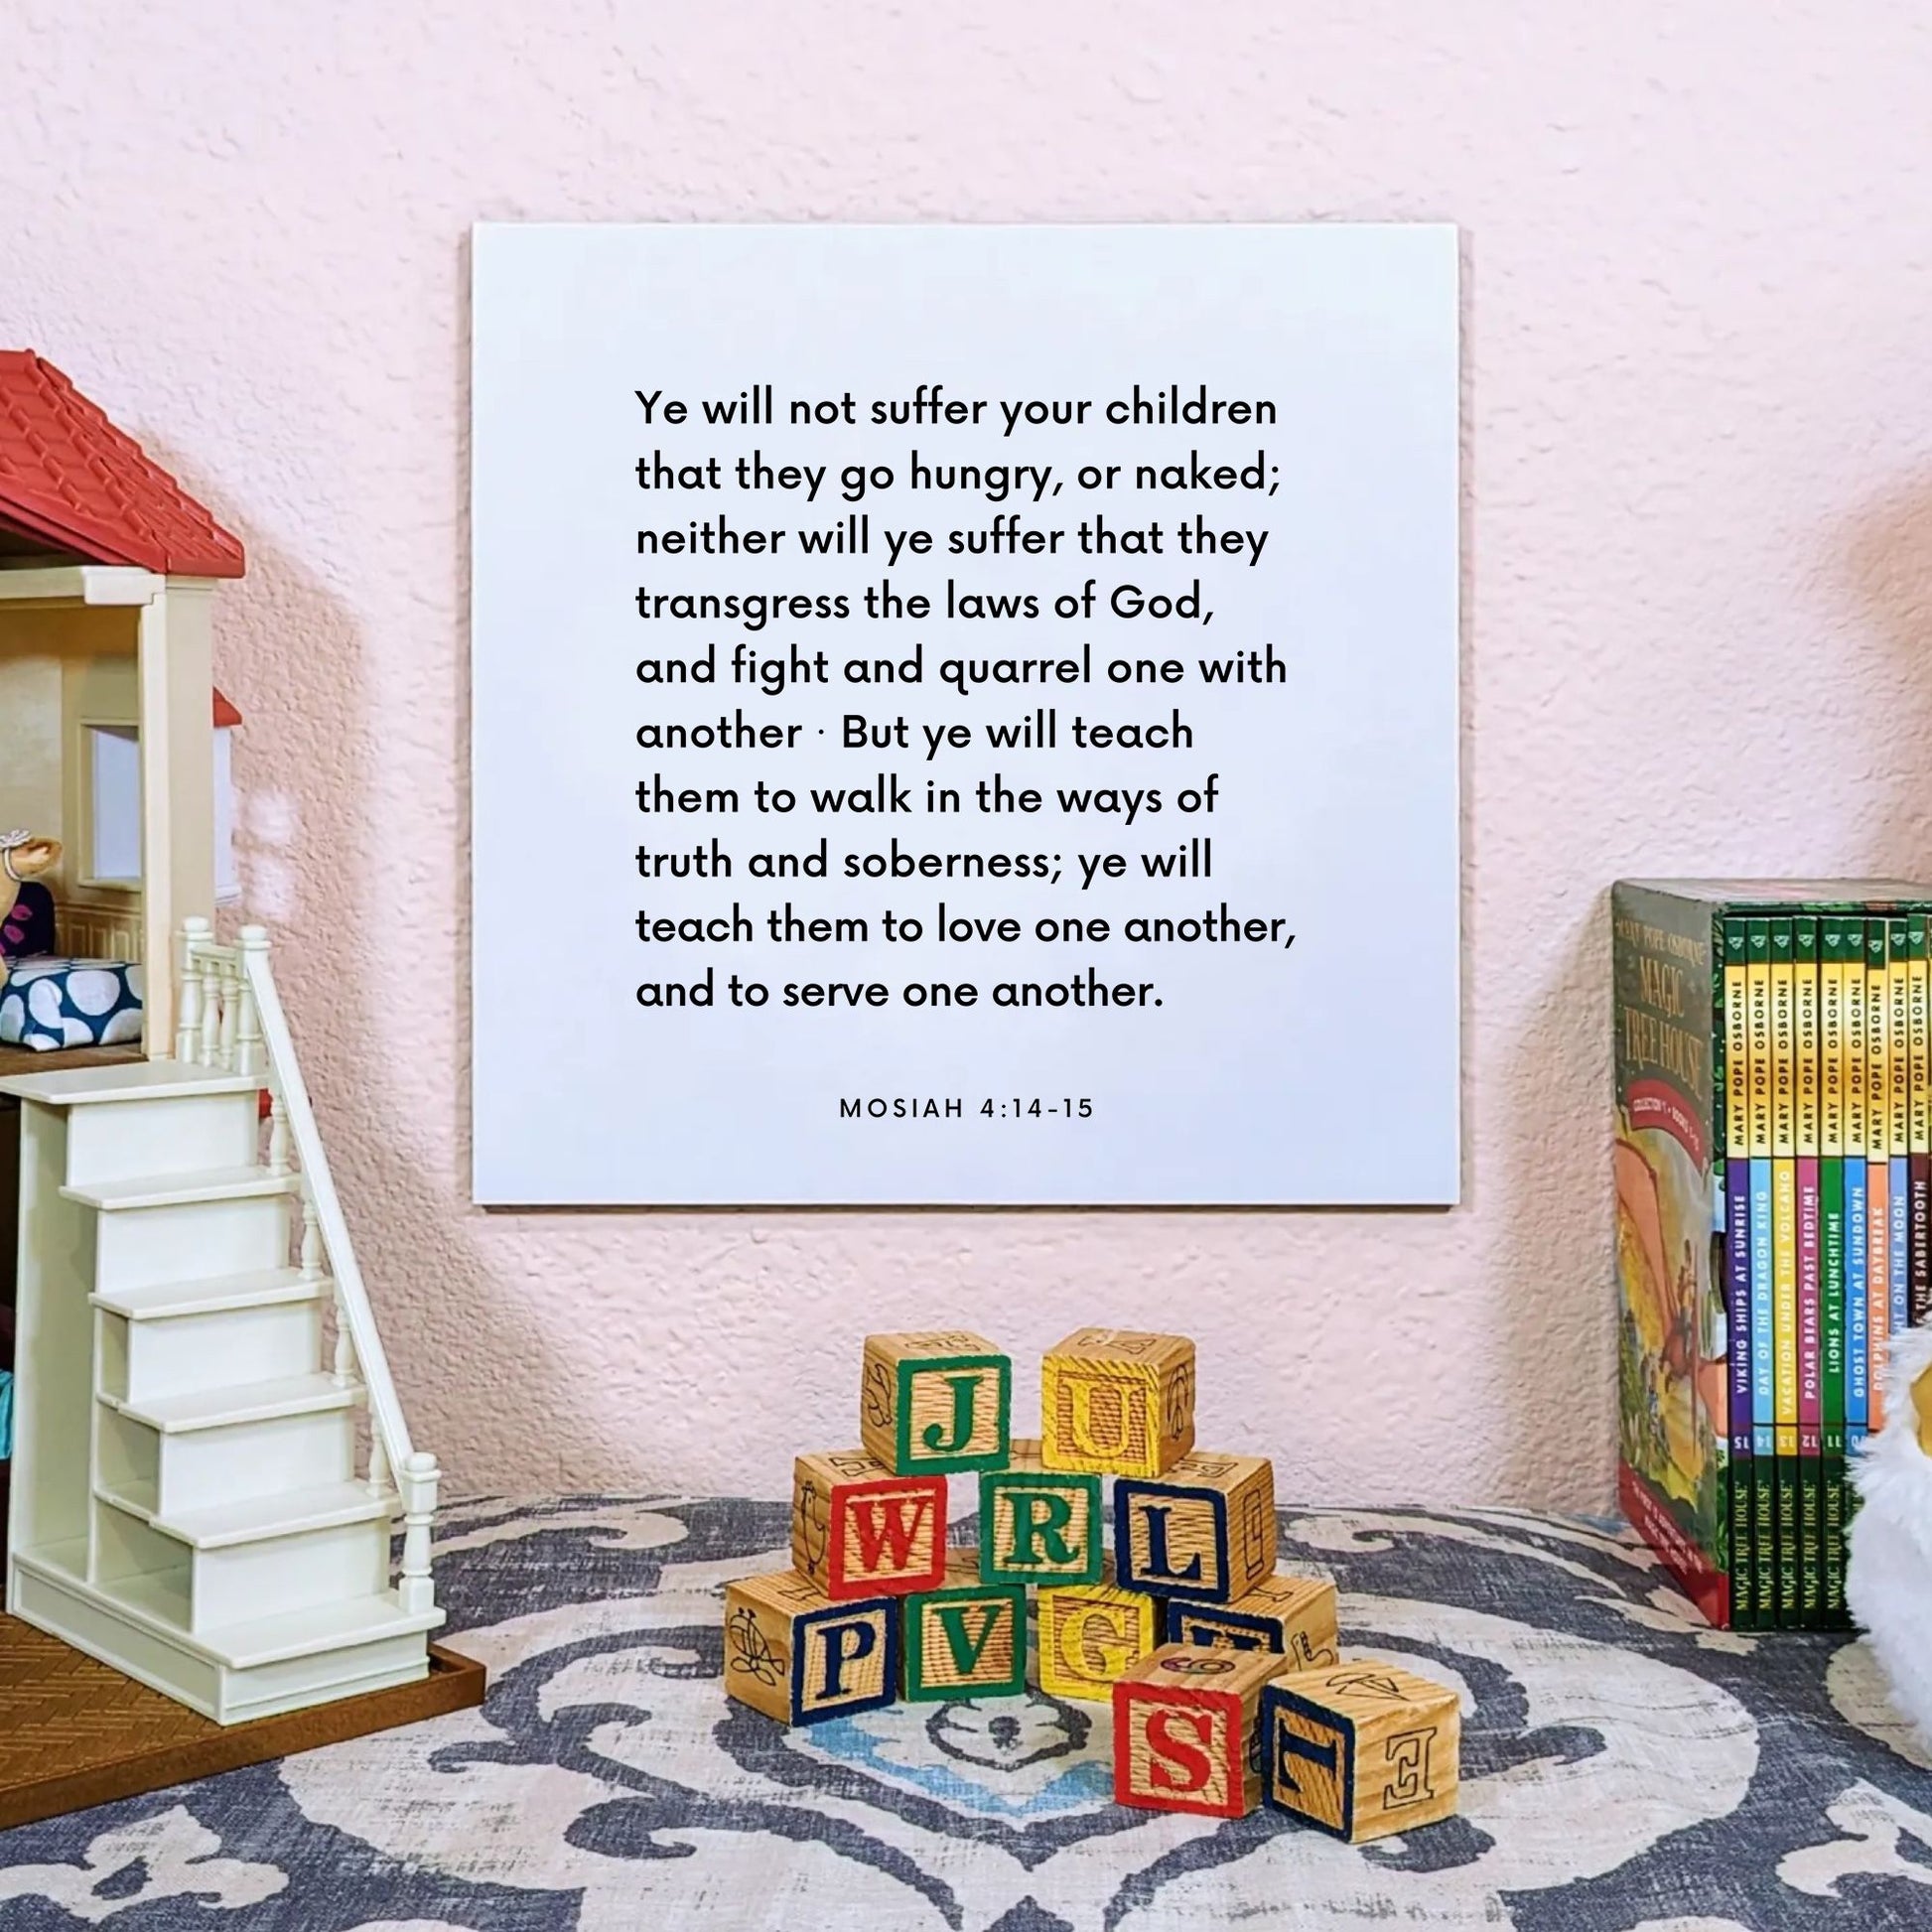 Playroom mouting of the scripture tile for Mosiah 4:14-15 - "Ye will teach them to love one another and serve one another"